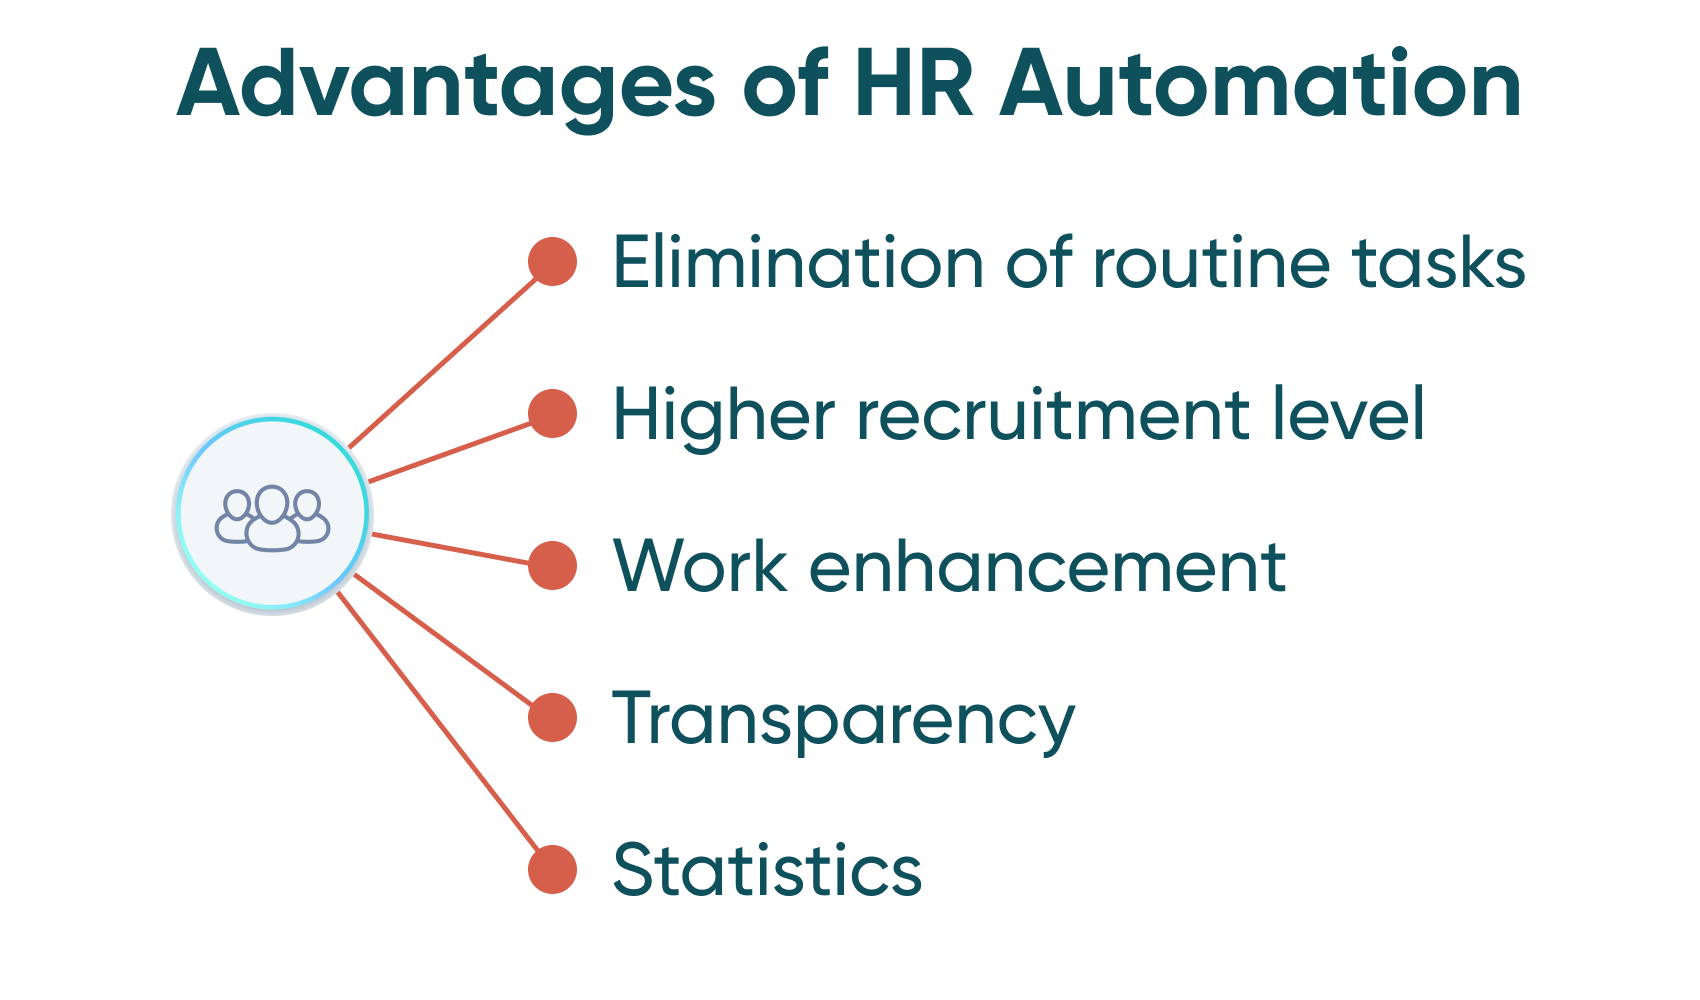 A bullet point image showing the main benefits of HR automation.